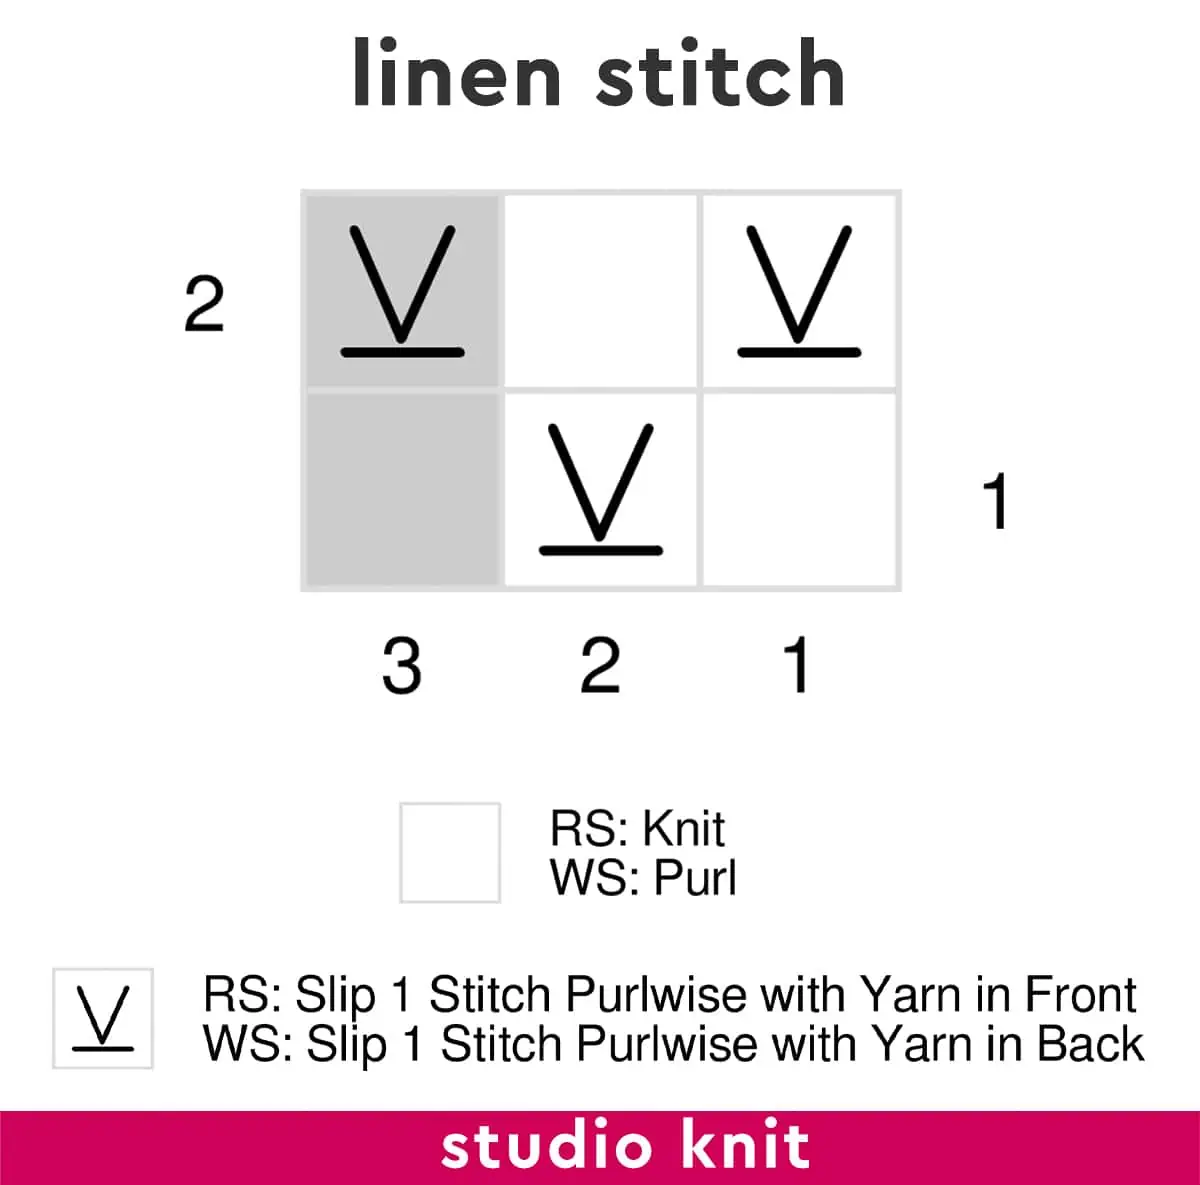 Knitting chart for the linen stitch.